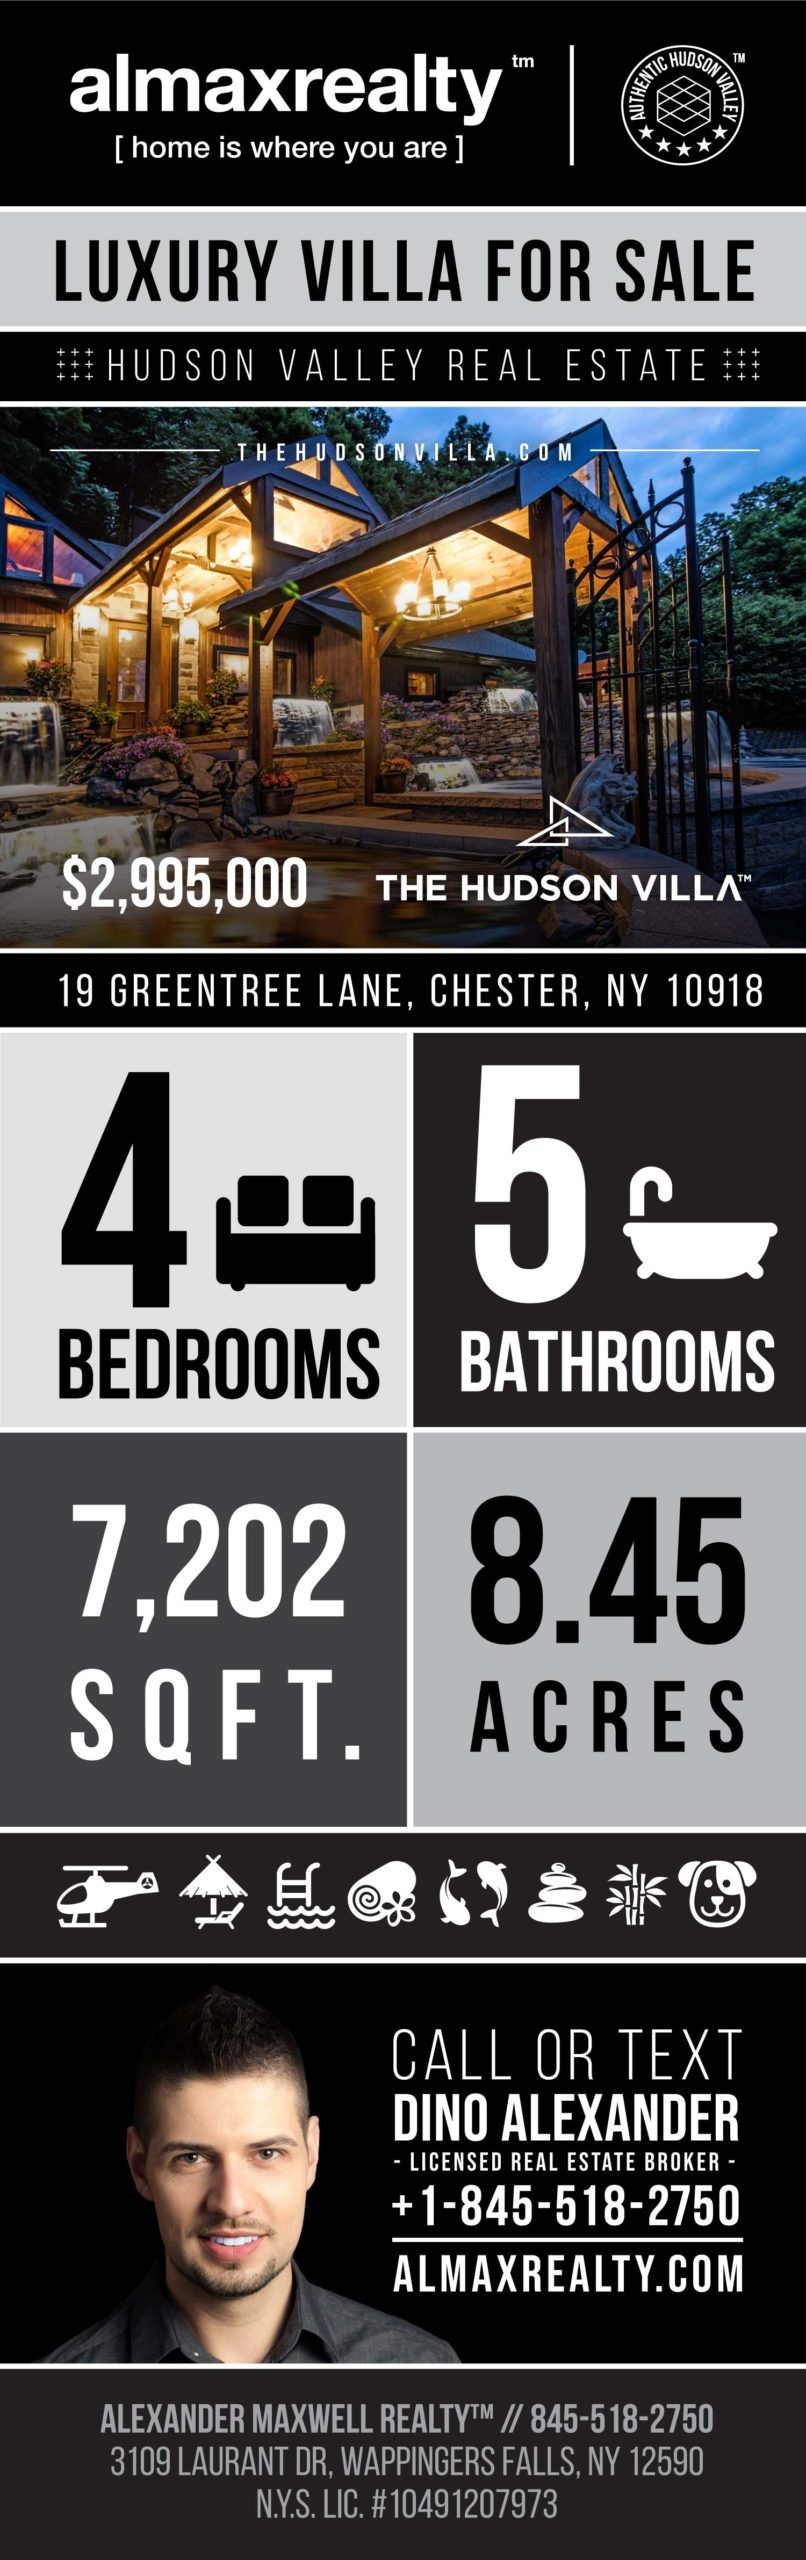 Infographic - Luxury Hudson Valley for Sale